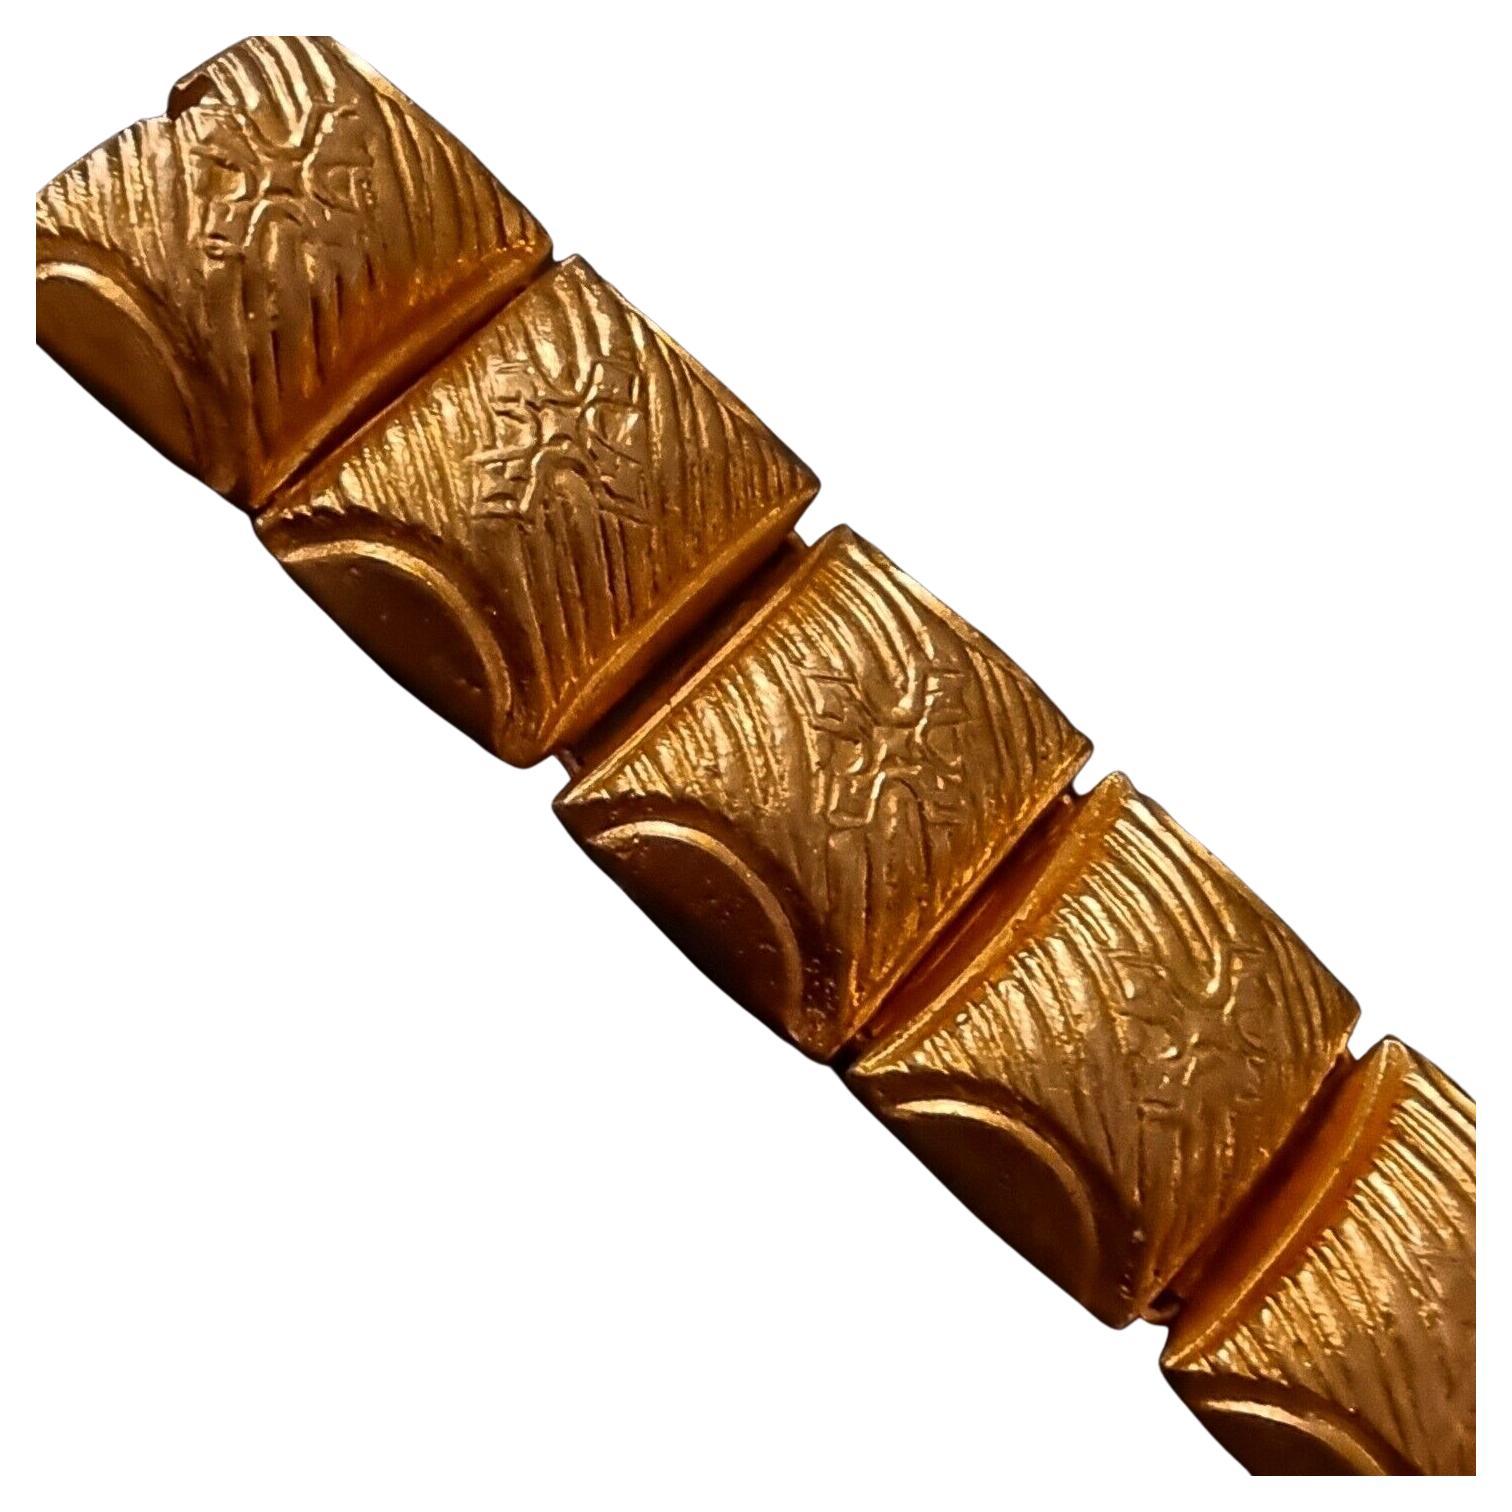 Magnificent old BRACELET in gilded bronze by Line Vautrin (1913-1997),
40s vintage,
signed LV (see photos),
total length 18 cm, length without clasp 17 cm, width 2.3 cm, weight 52 g,
listed canonical model of Line Vautrin,
clasp works